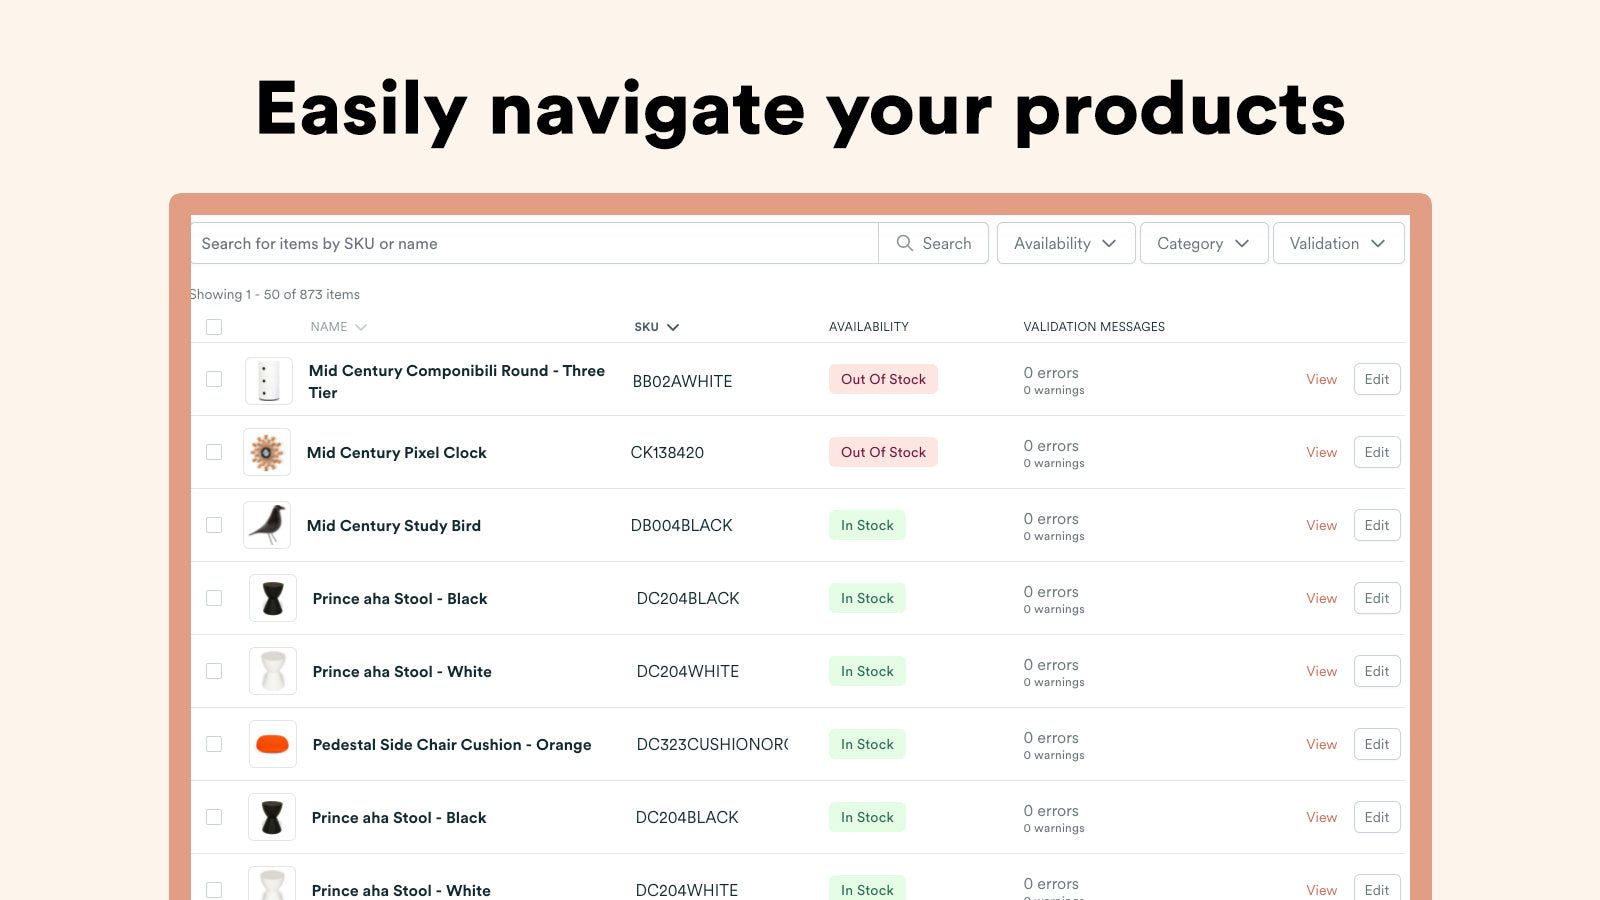 Easily Navigate Your Products